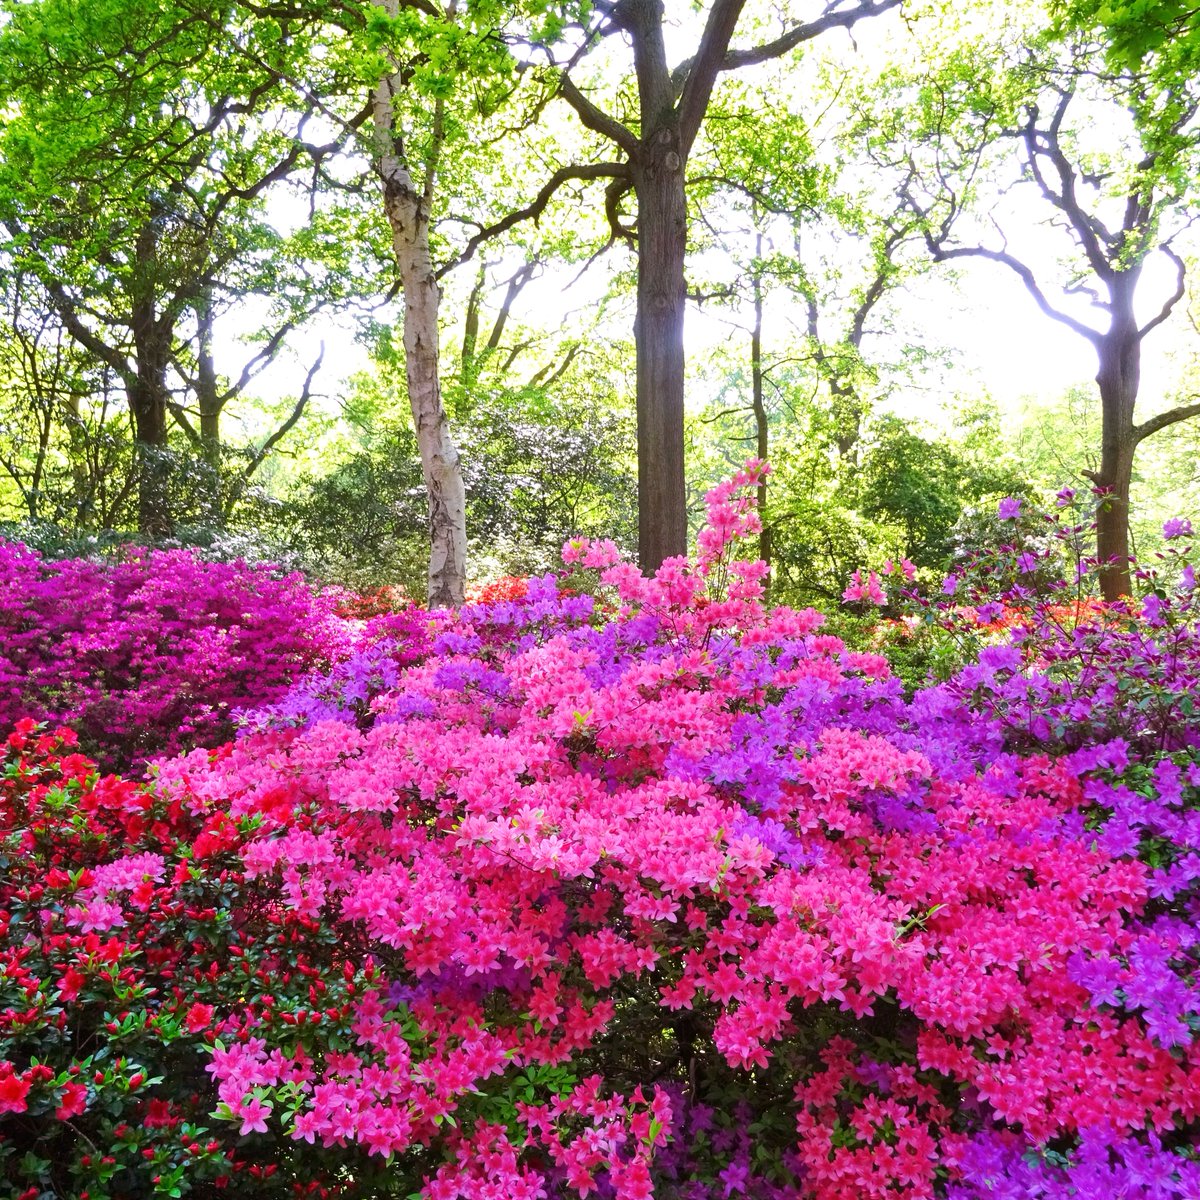 One from the archives for #MagentaMonday:  the  beautiful #IsabellaPlantation in #RichmondPark! 🩷🌸💜🌸💗@ThePhotoHour #flowers #flowerphotography #FlowersofTwitter #beautifulgardens